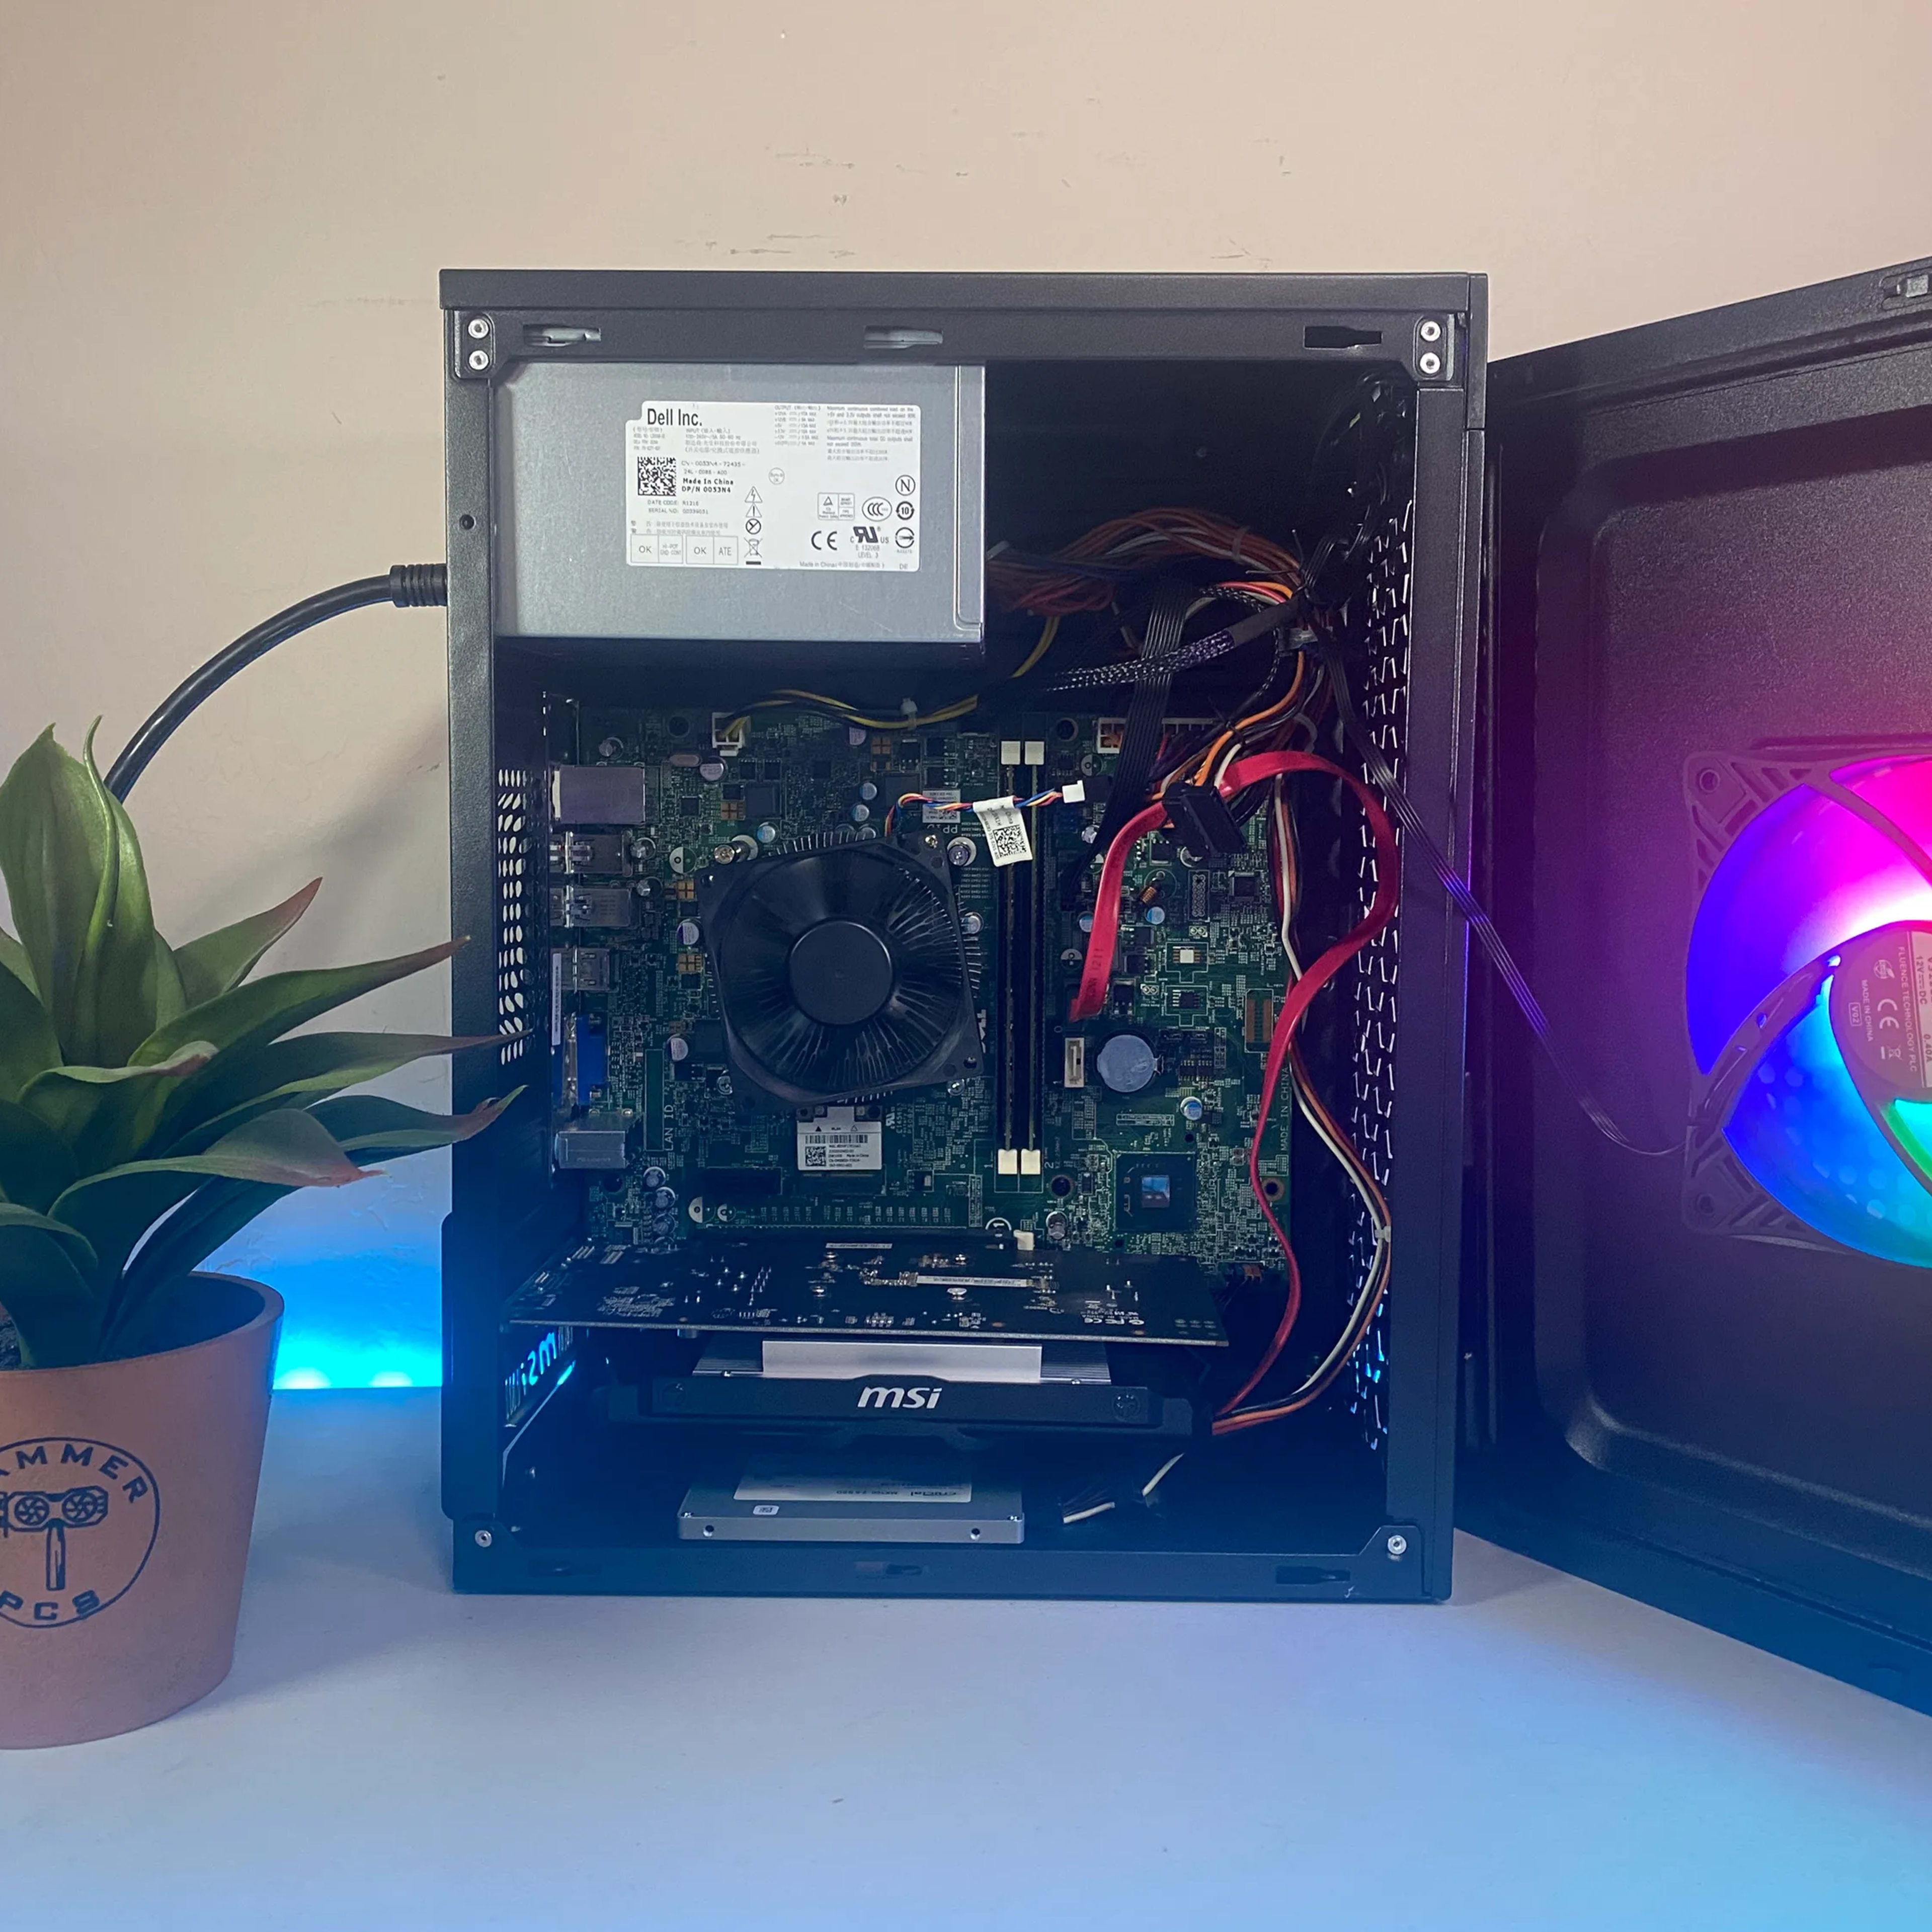 ✨ Awesome Inexpensive RGB Gaming PC ✨ Fortnite, Valorant, Roblox, Minecraft, and more!